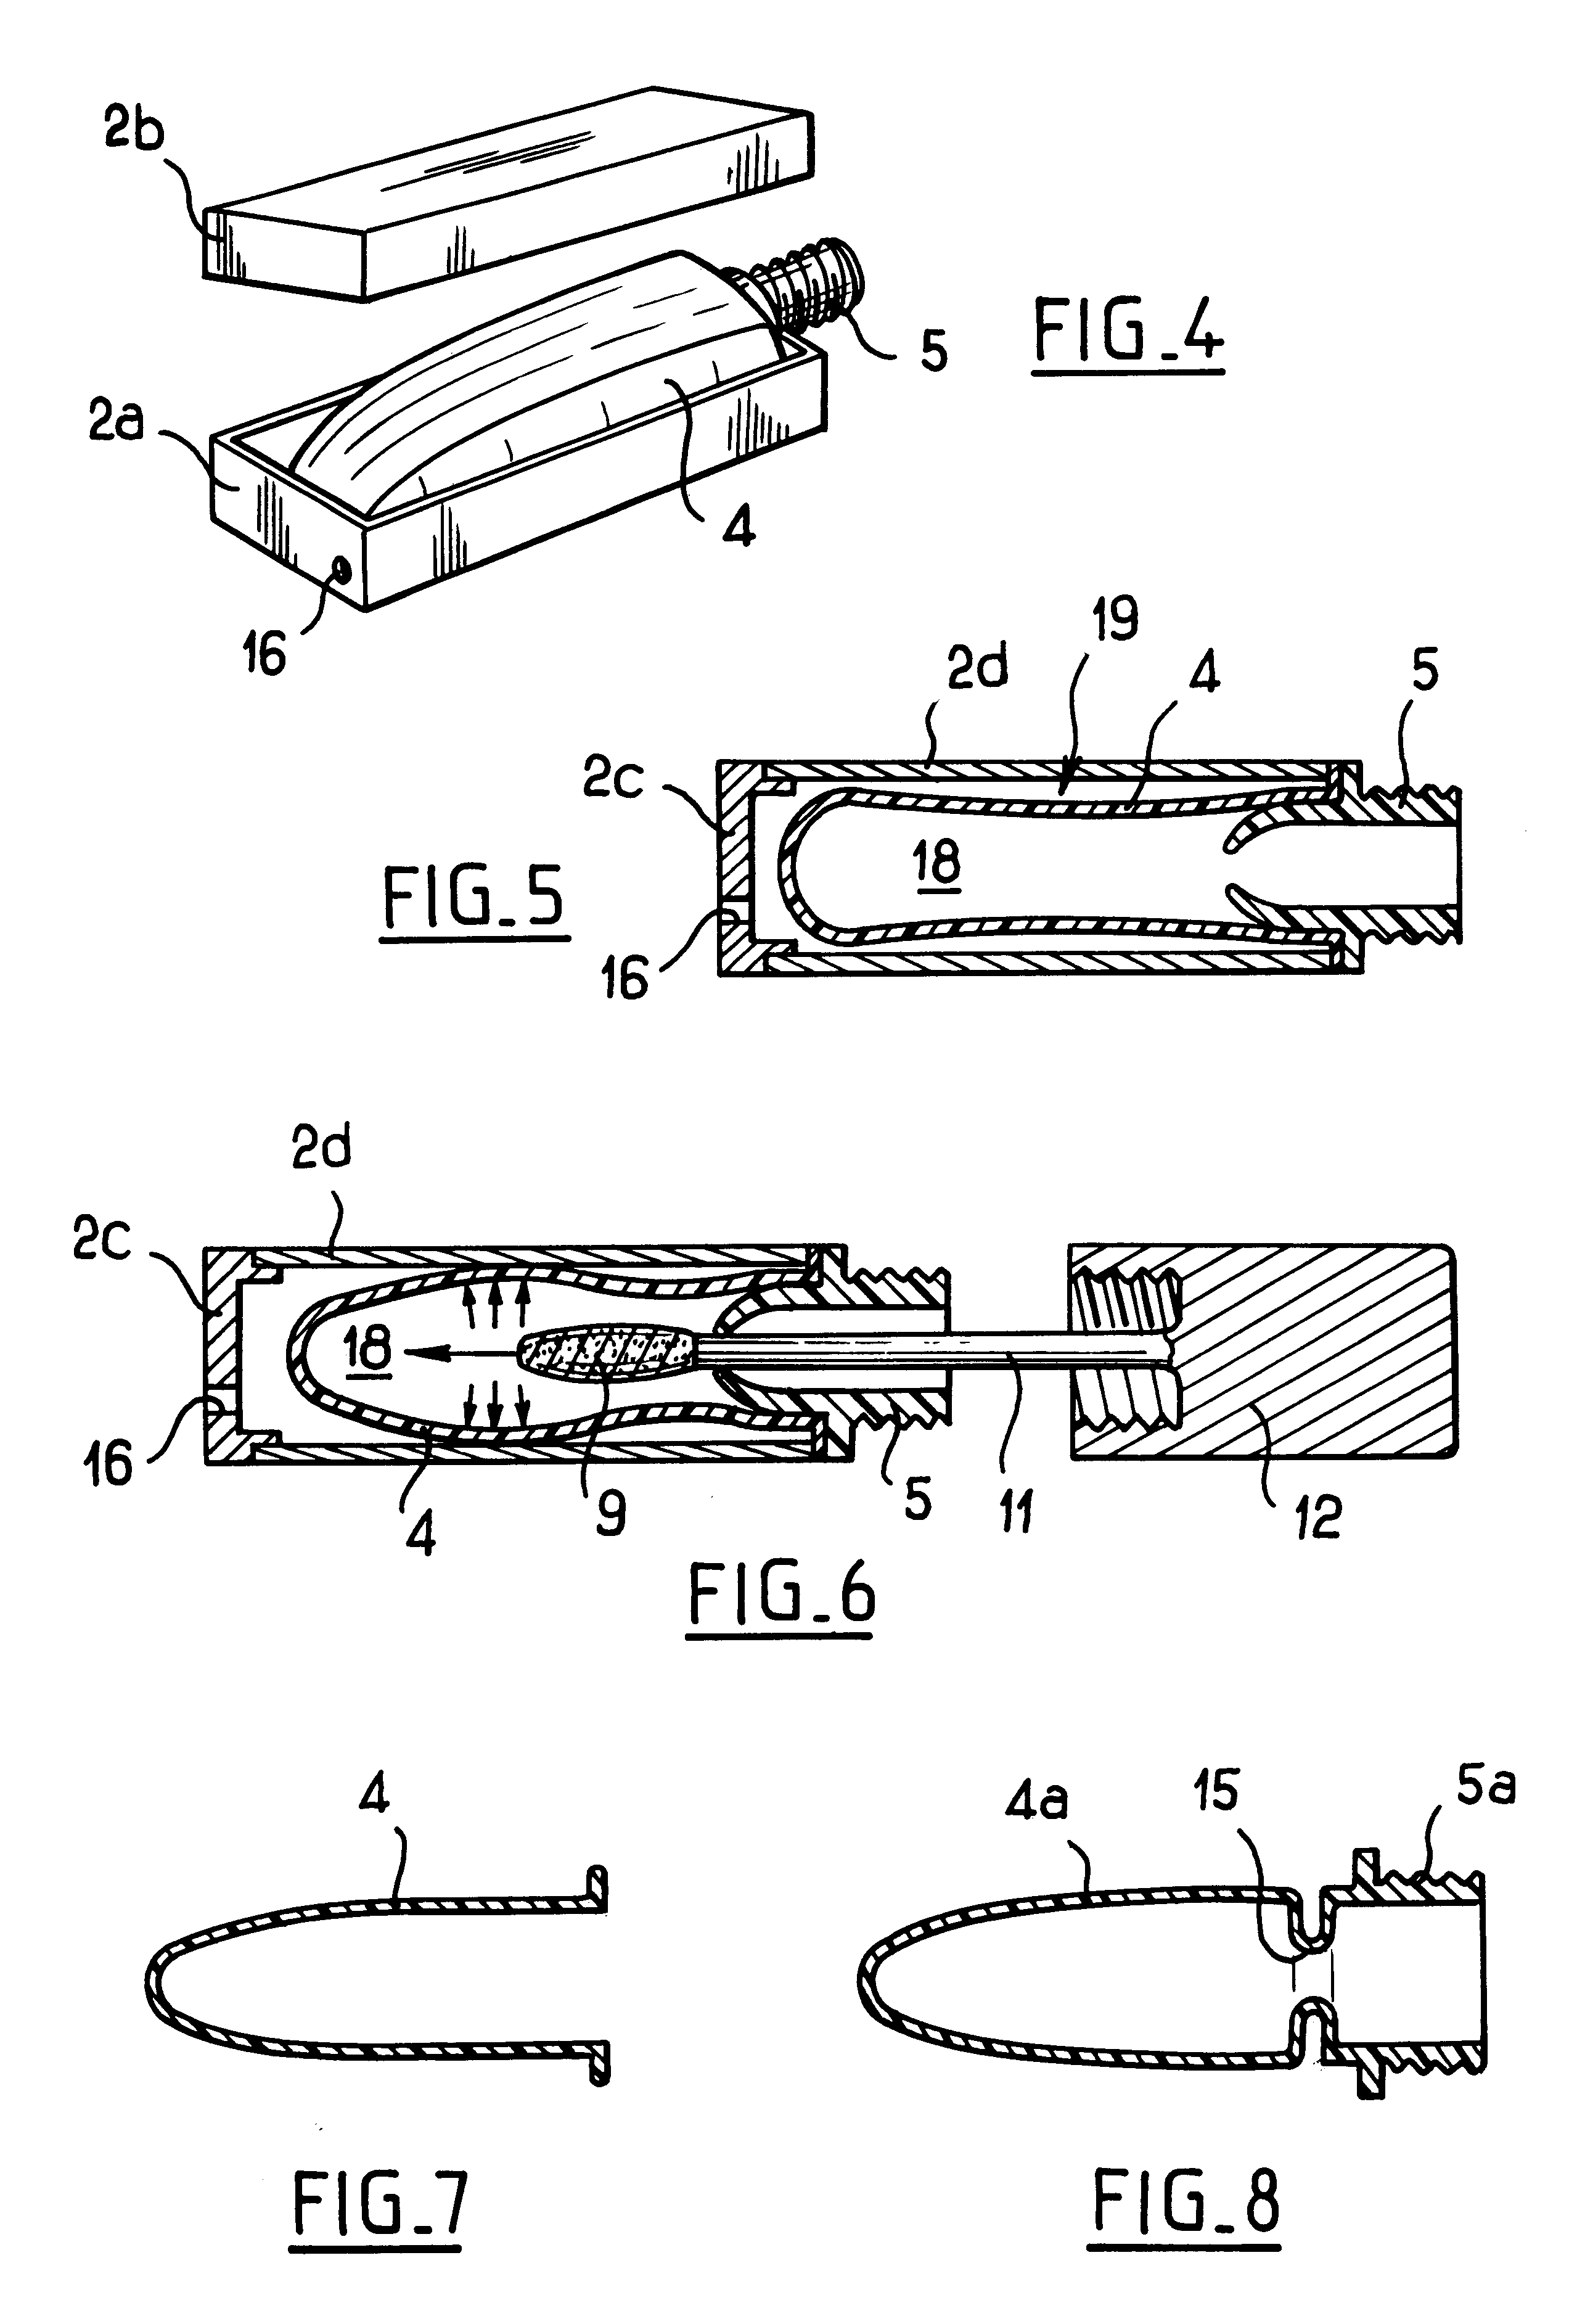 Device for packaging and applying makeup